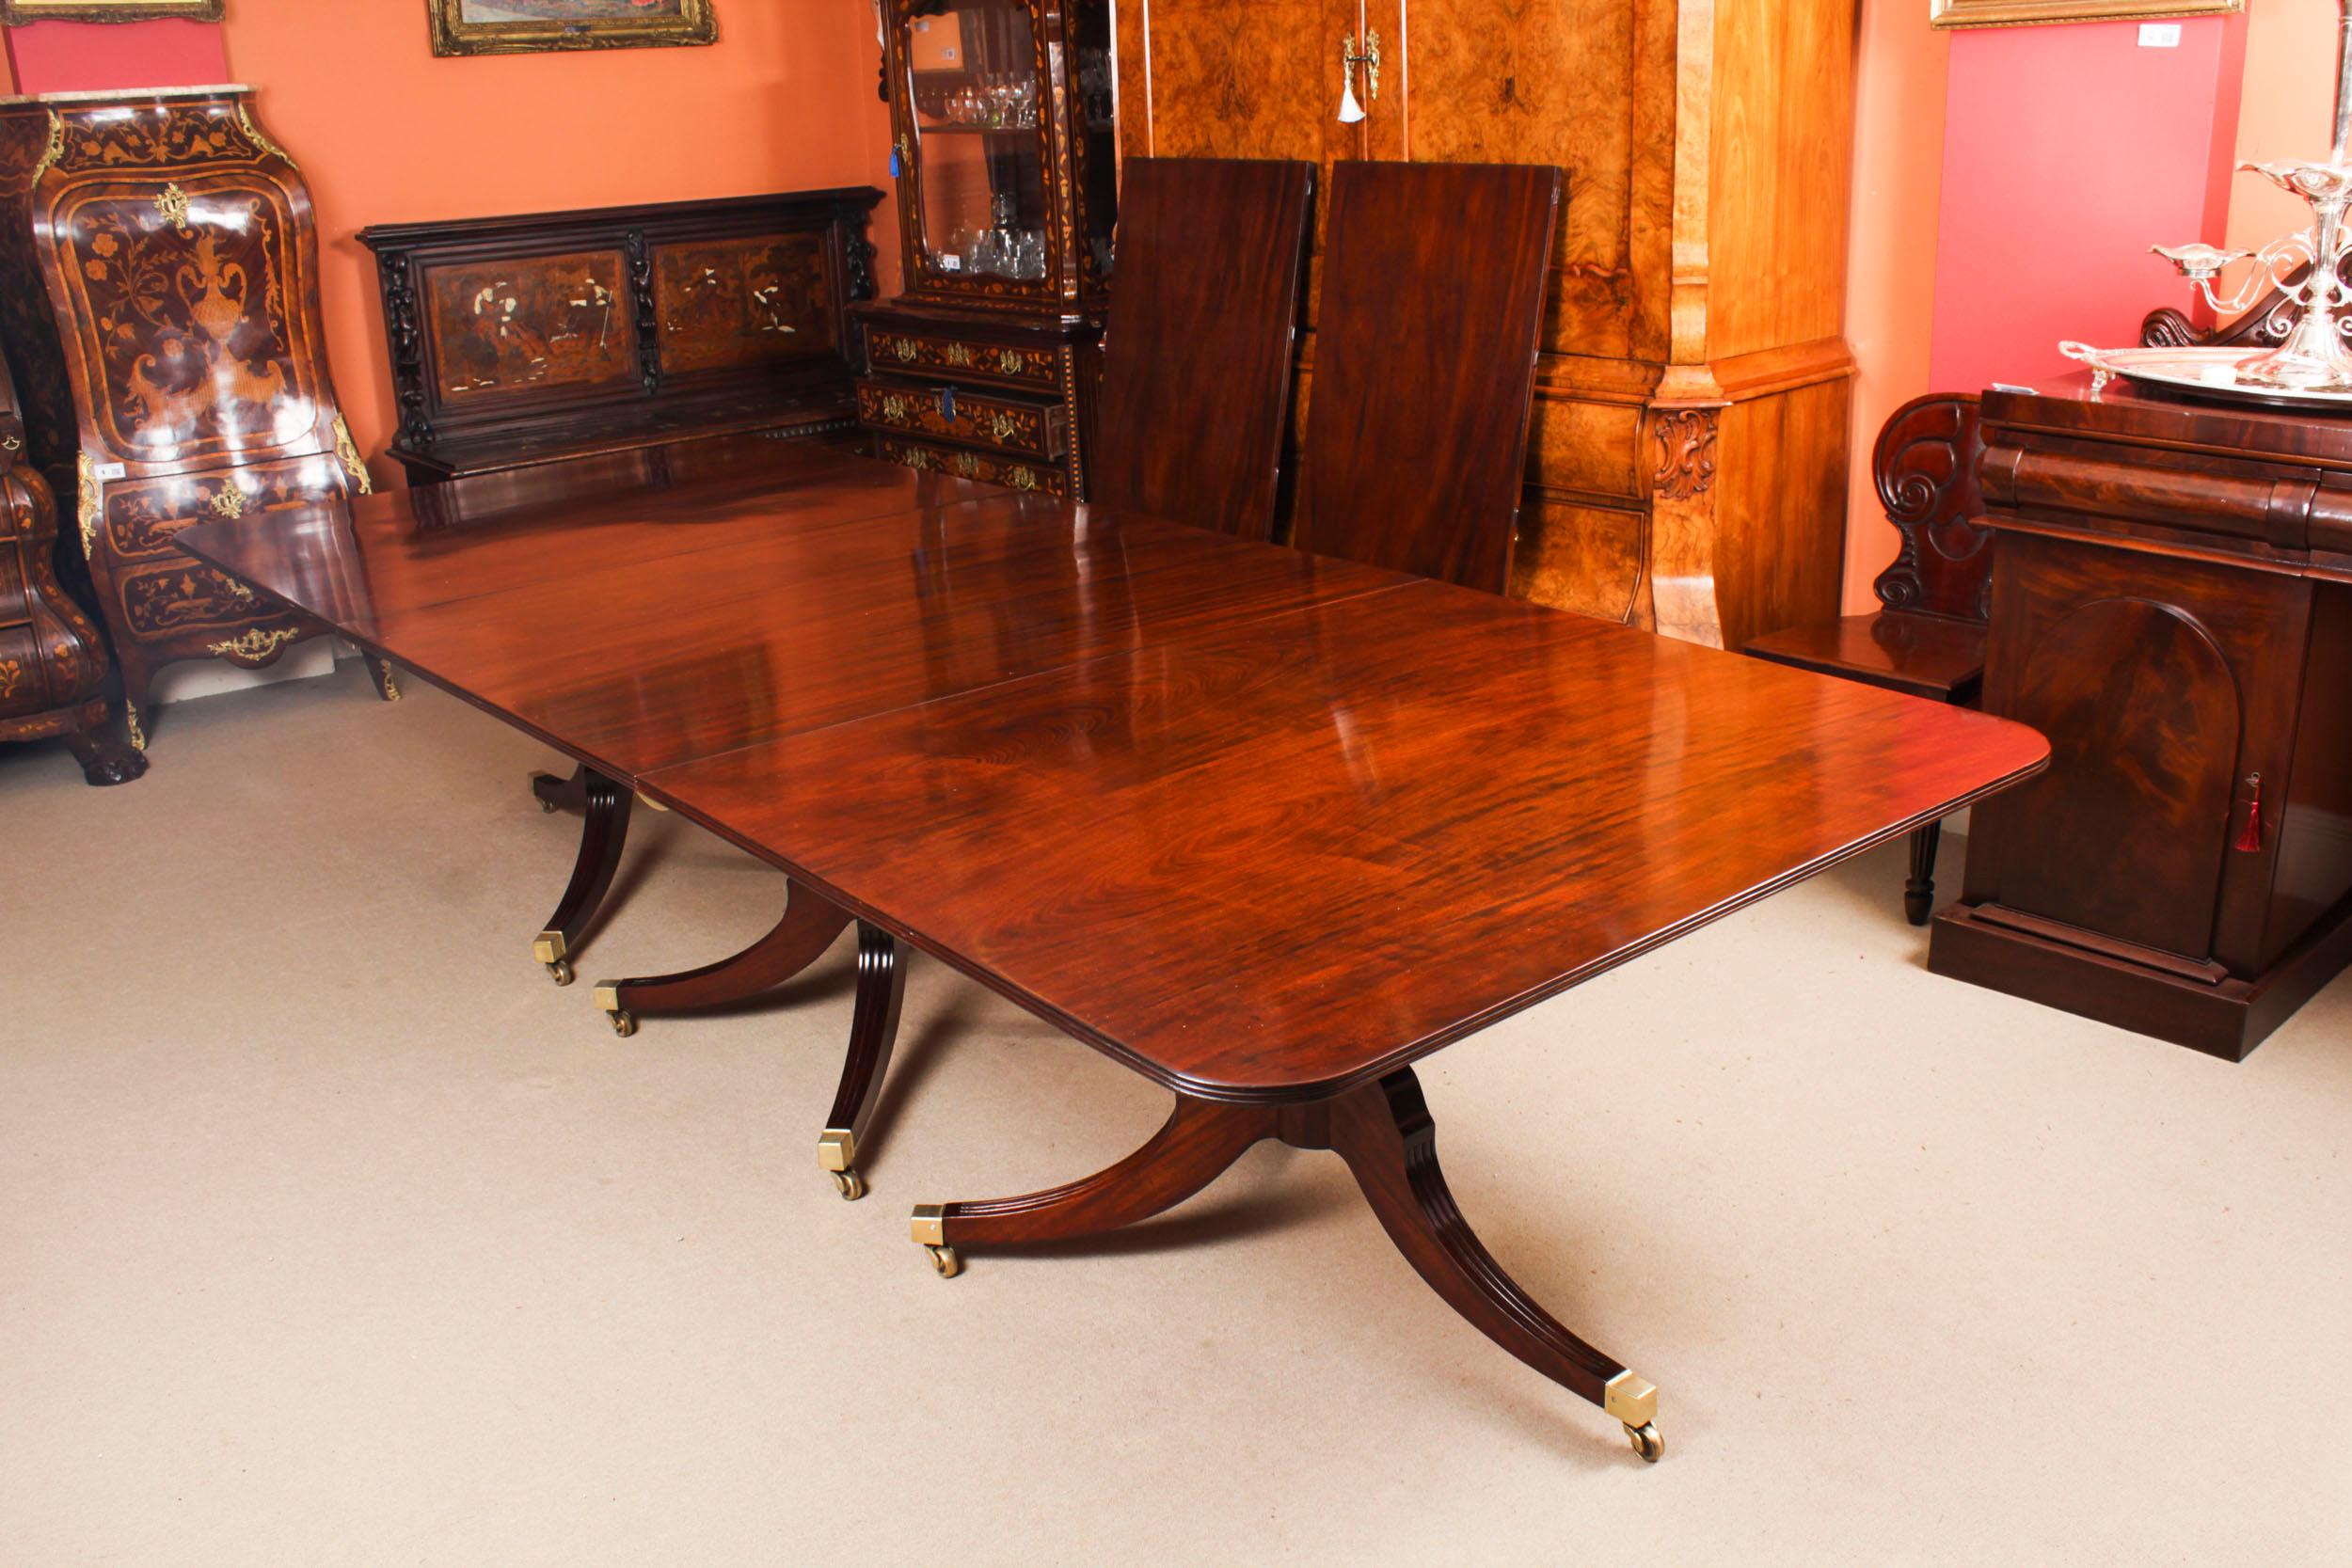 Antique 14ft Flame Mahogany Regency Revival Triple Pillar Dining Table 19th C For Sale 1